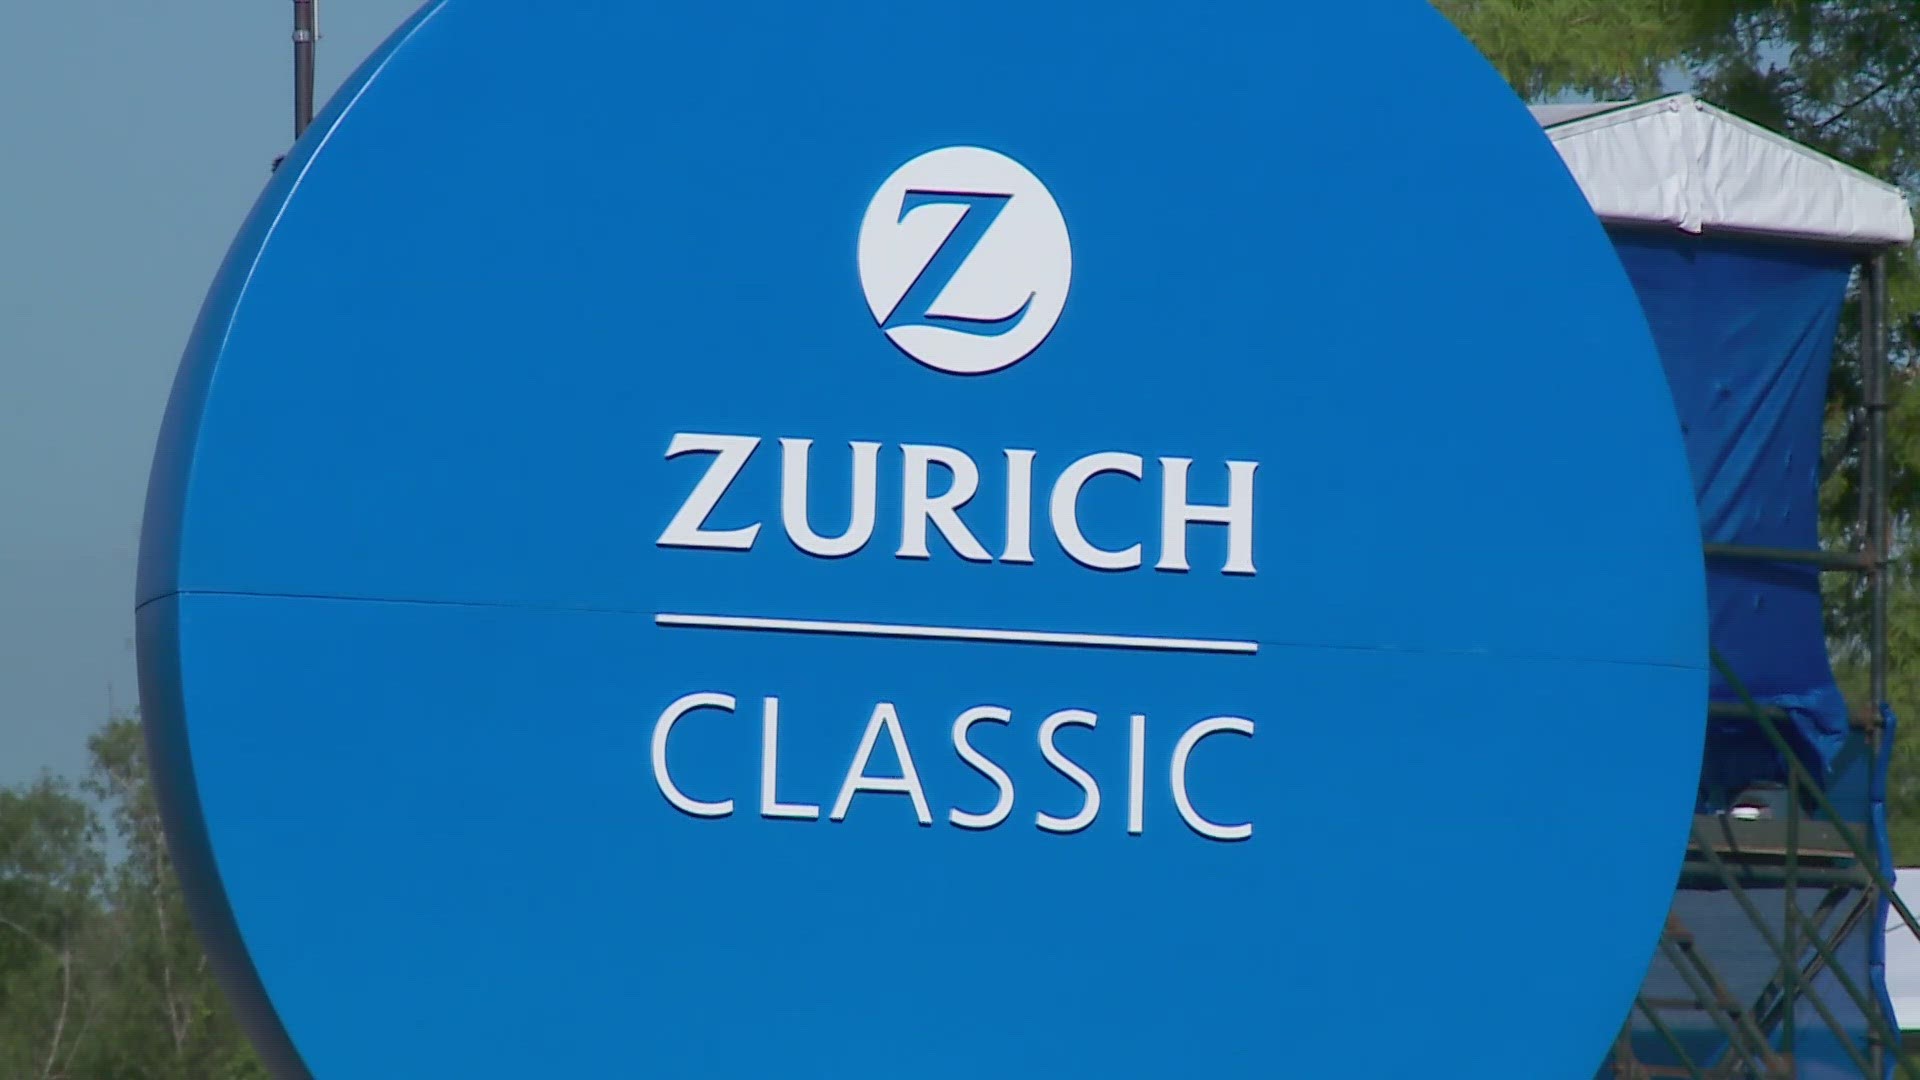 The 2023 Zurich Classic has officially started at TPC Louisiana in Avondale which will be good for the local economy.